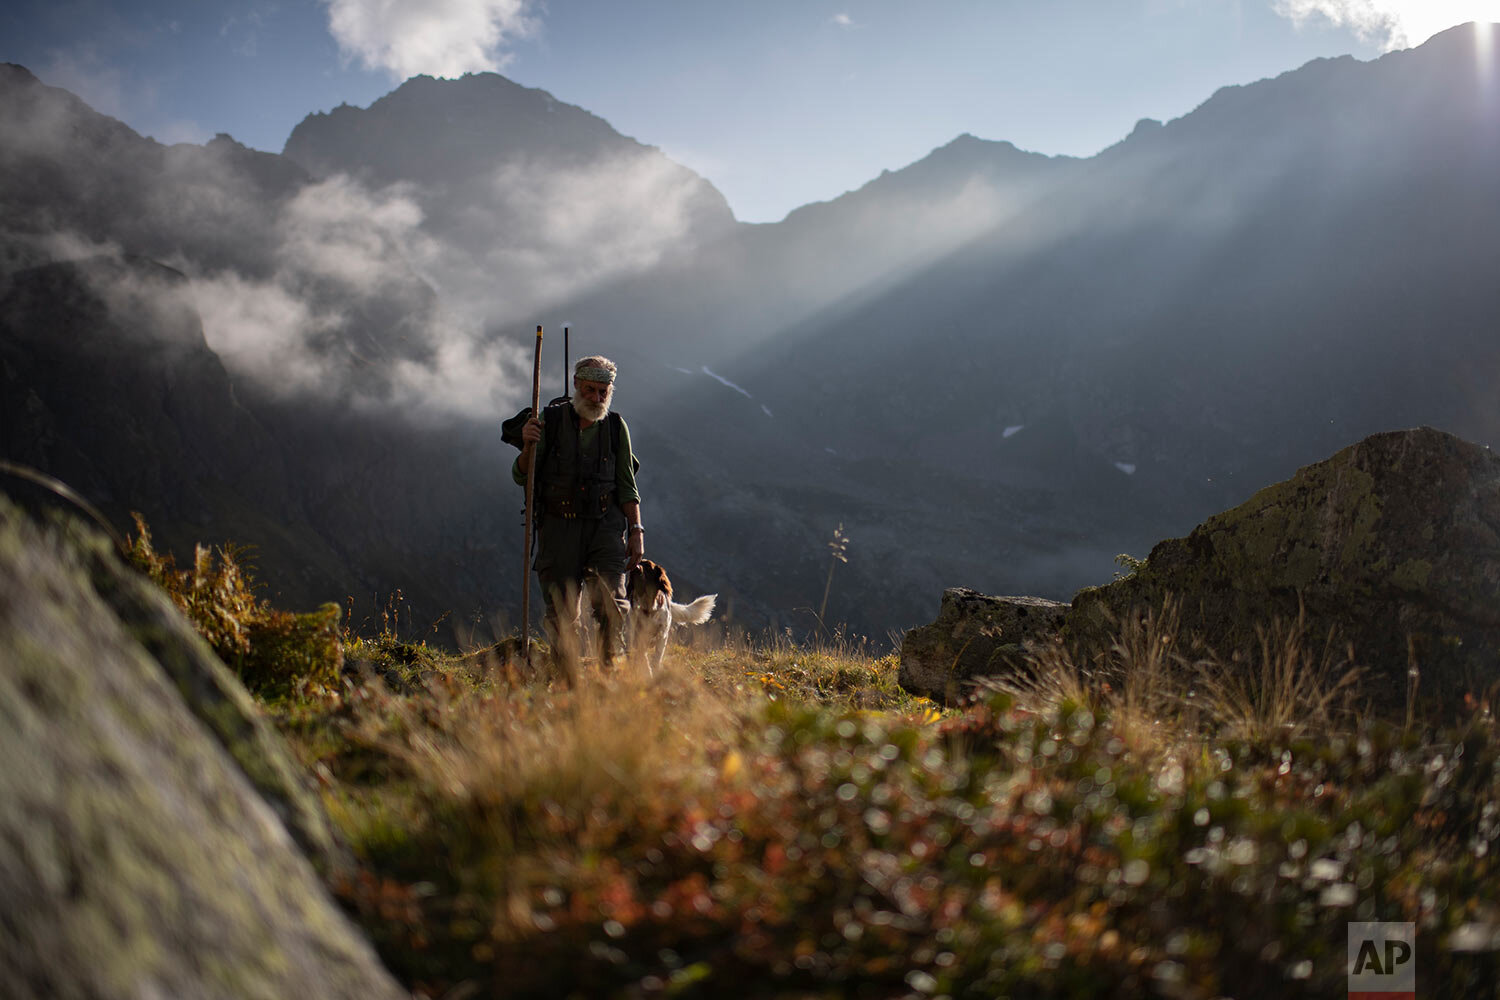  Hunter Peter Marugg and his dog, Fjura, look for chamois, in the second of the three-week-long hunting season in Klosters, Graubuenden, Switzerland, on Thursday, Sept. 19, 2019. The 69-year old said he has been hunting since 1970. Hunting has a long